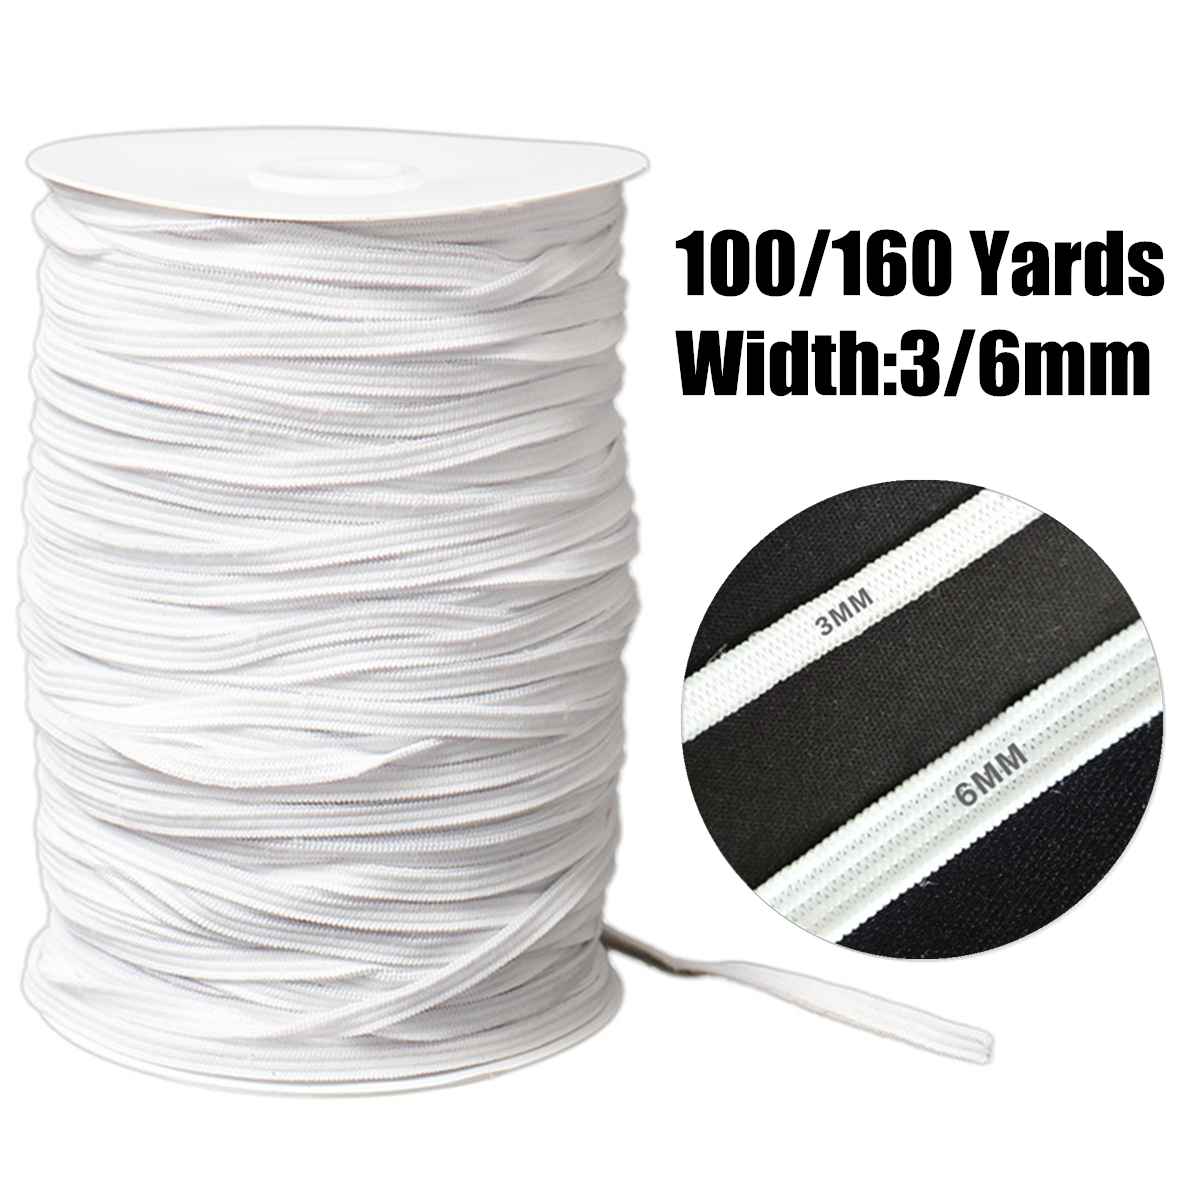 100160-Yards-DIY-Elastic-Band-Sewing-Crafting-Making-Braided-Cords-Knit-White-1671316-2